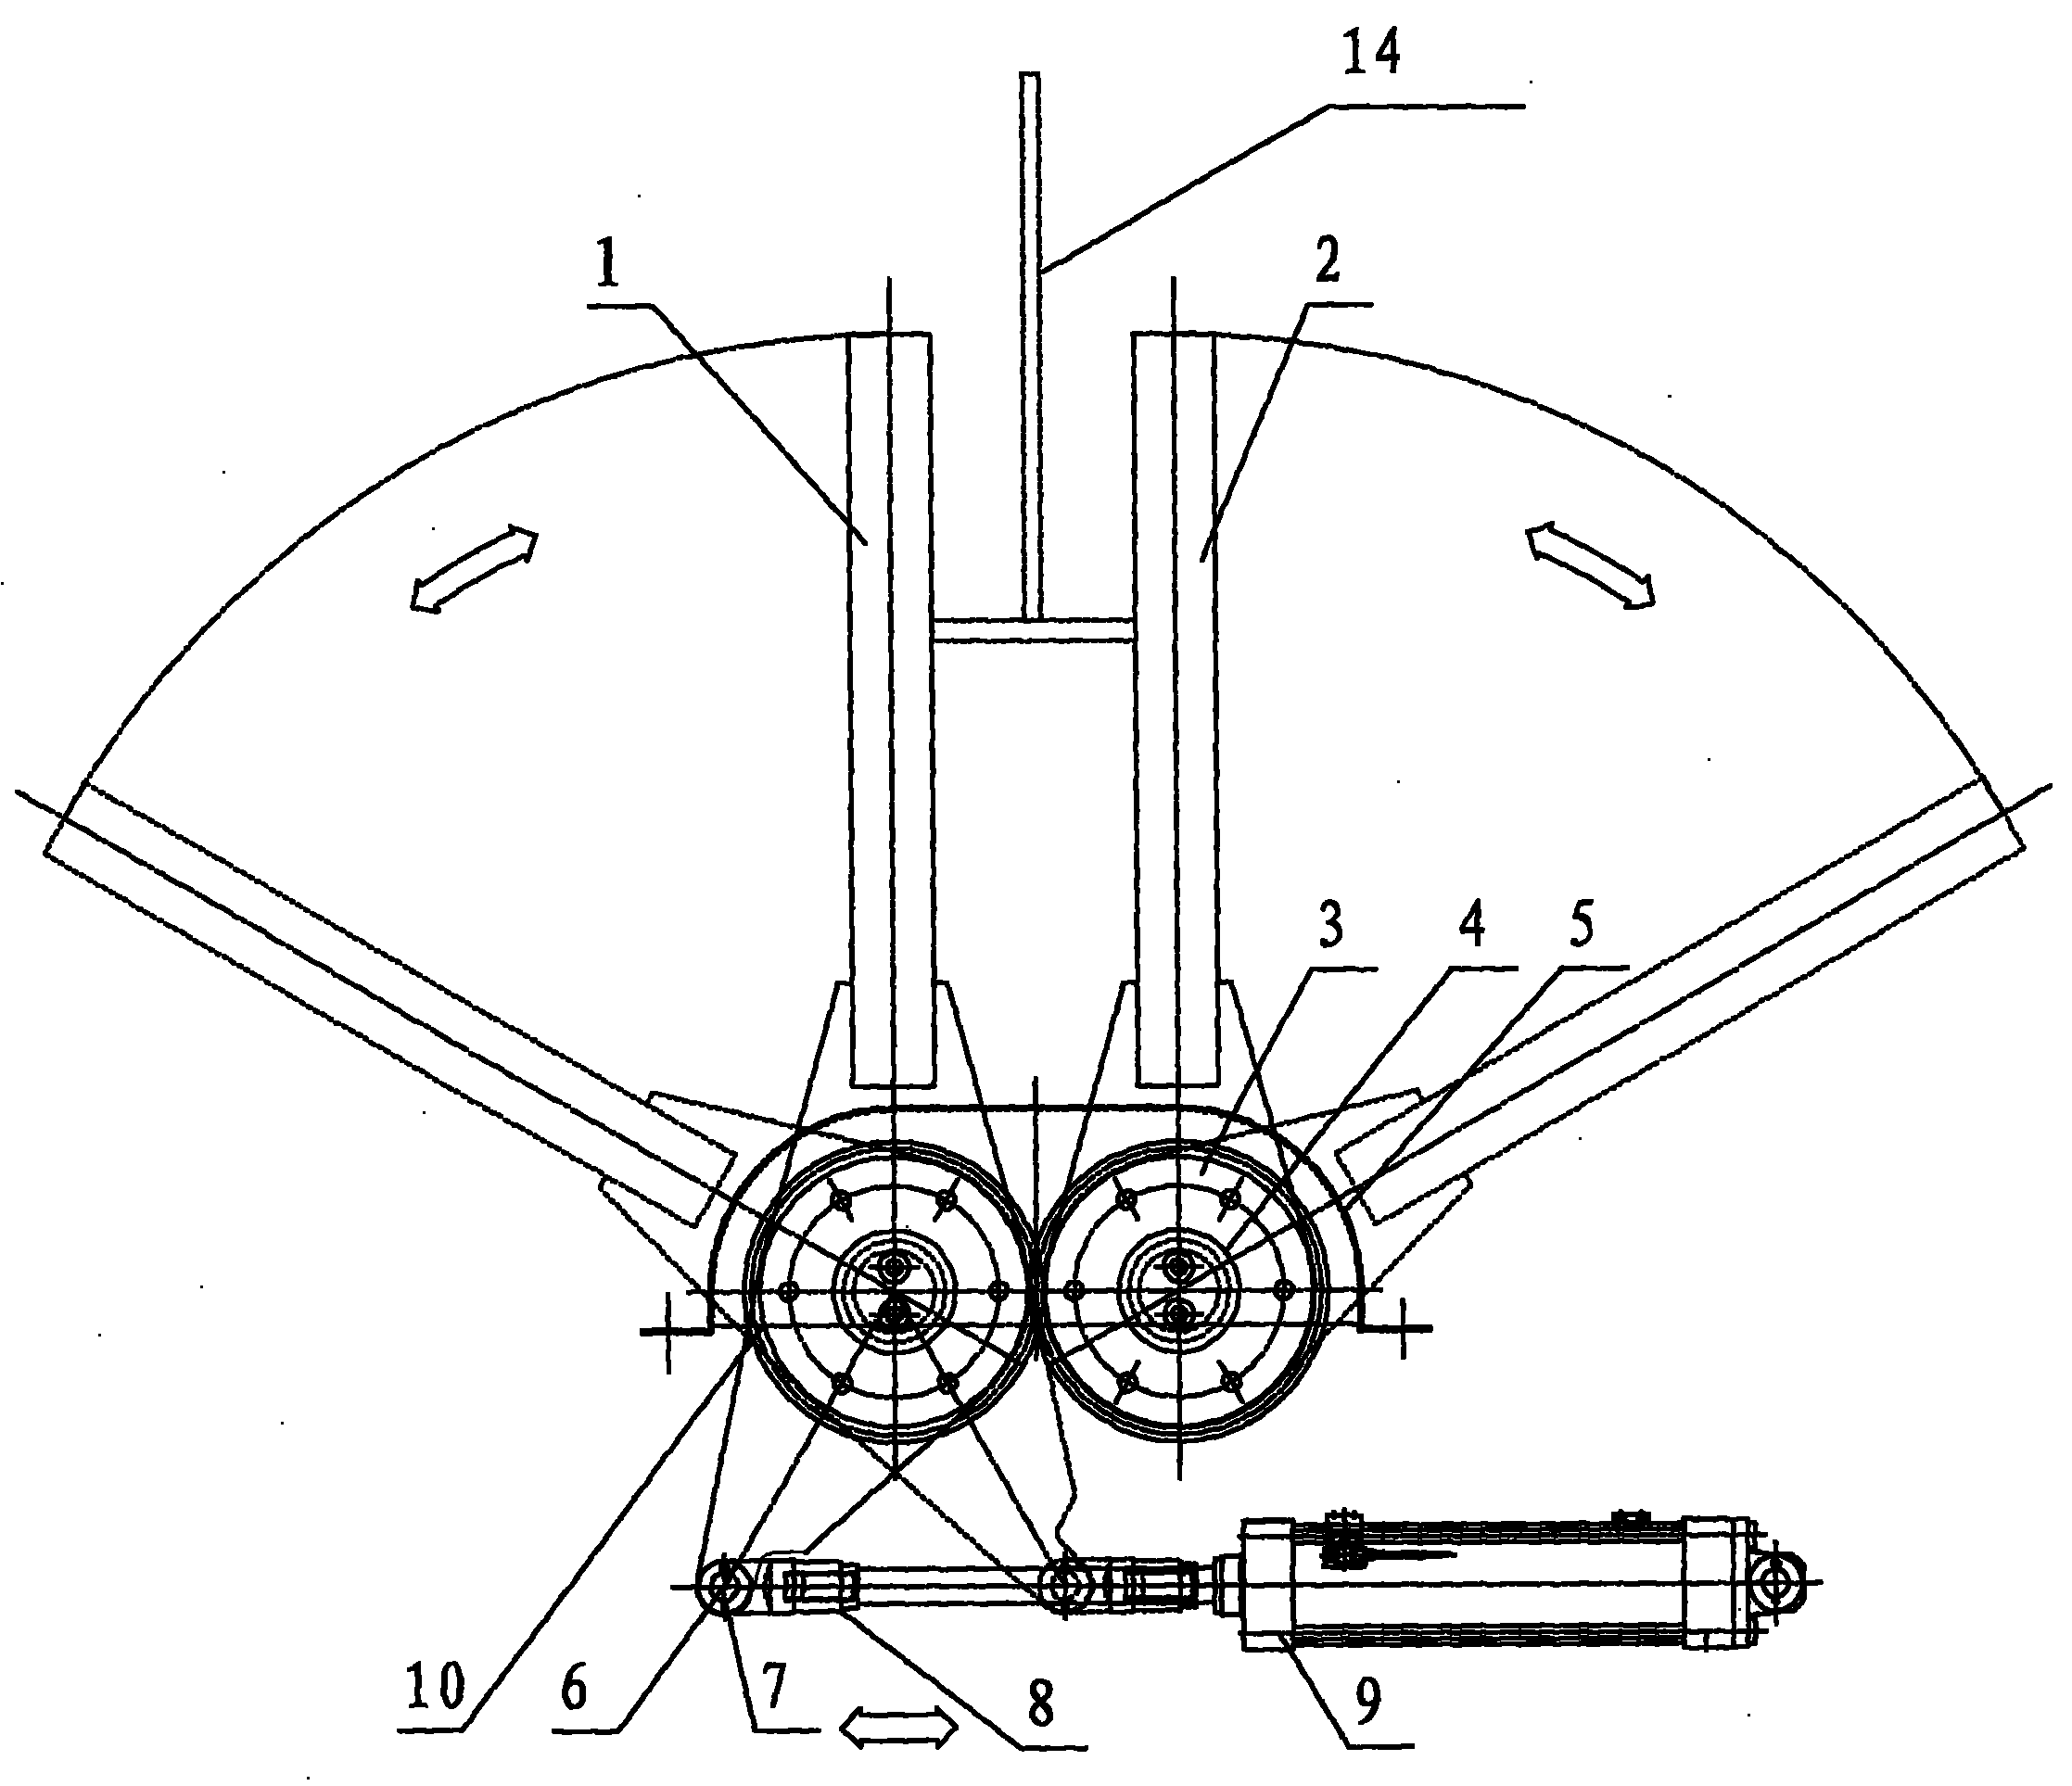 Centering mechanism of transverse leveling machine for T-shaped rafts